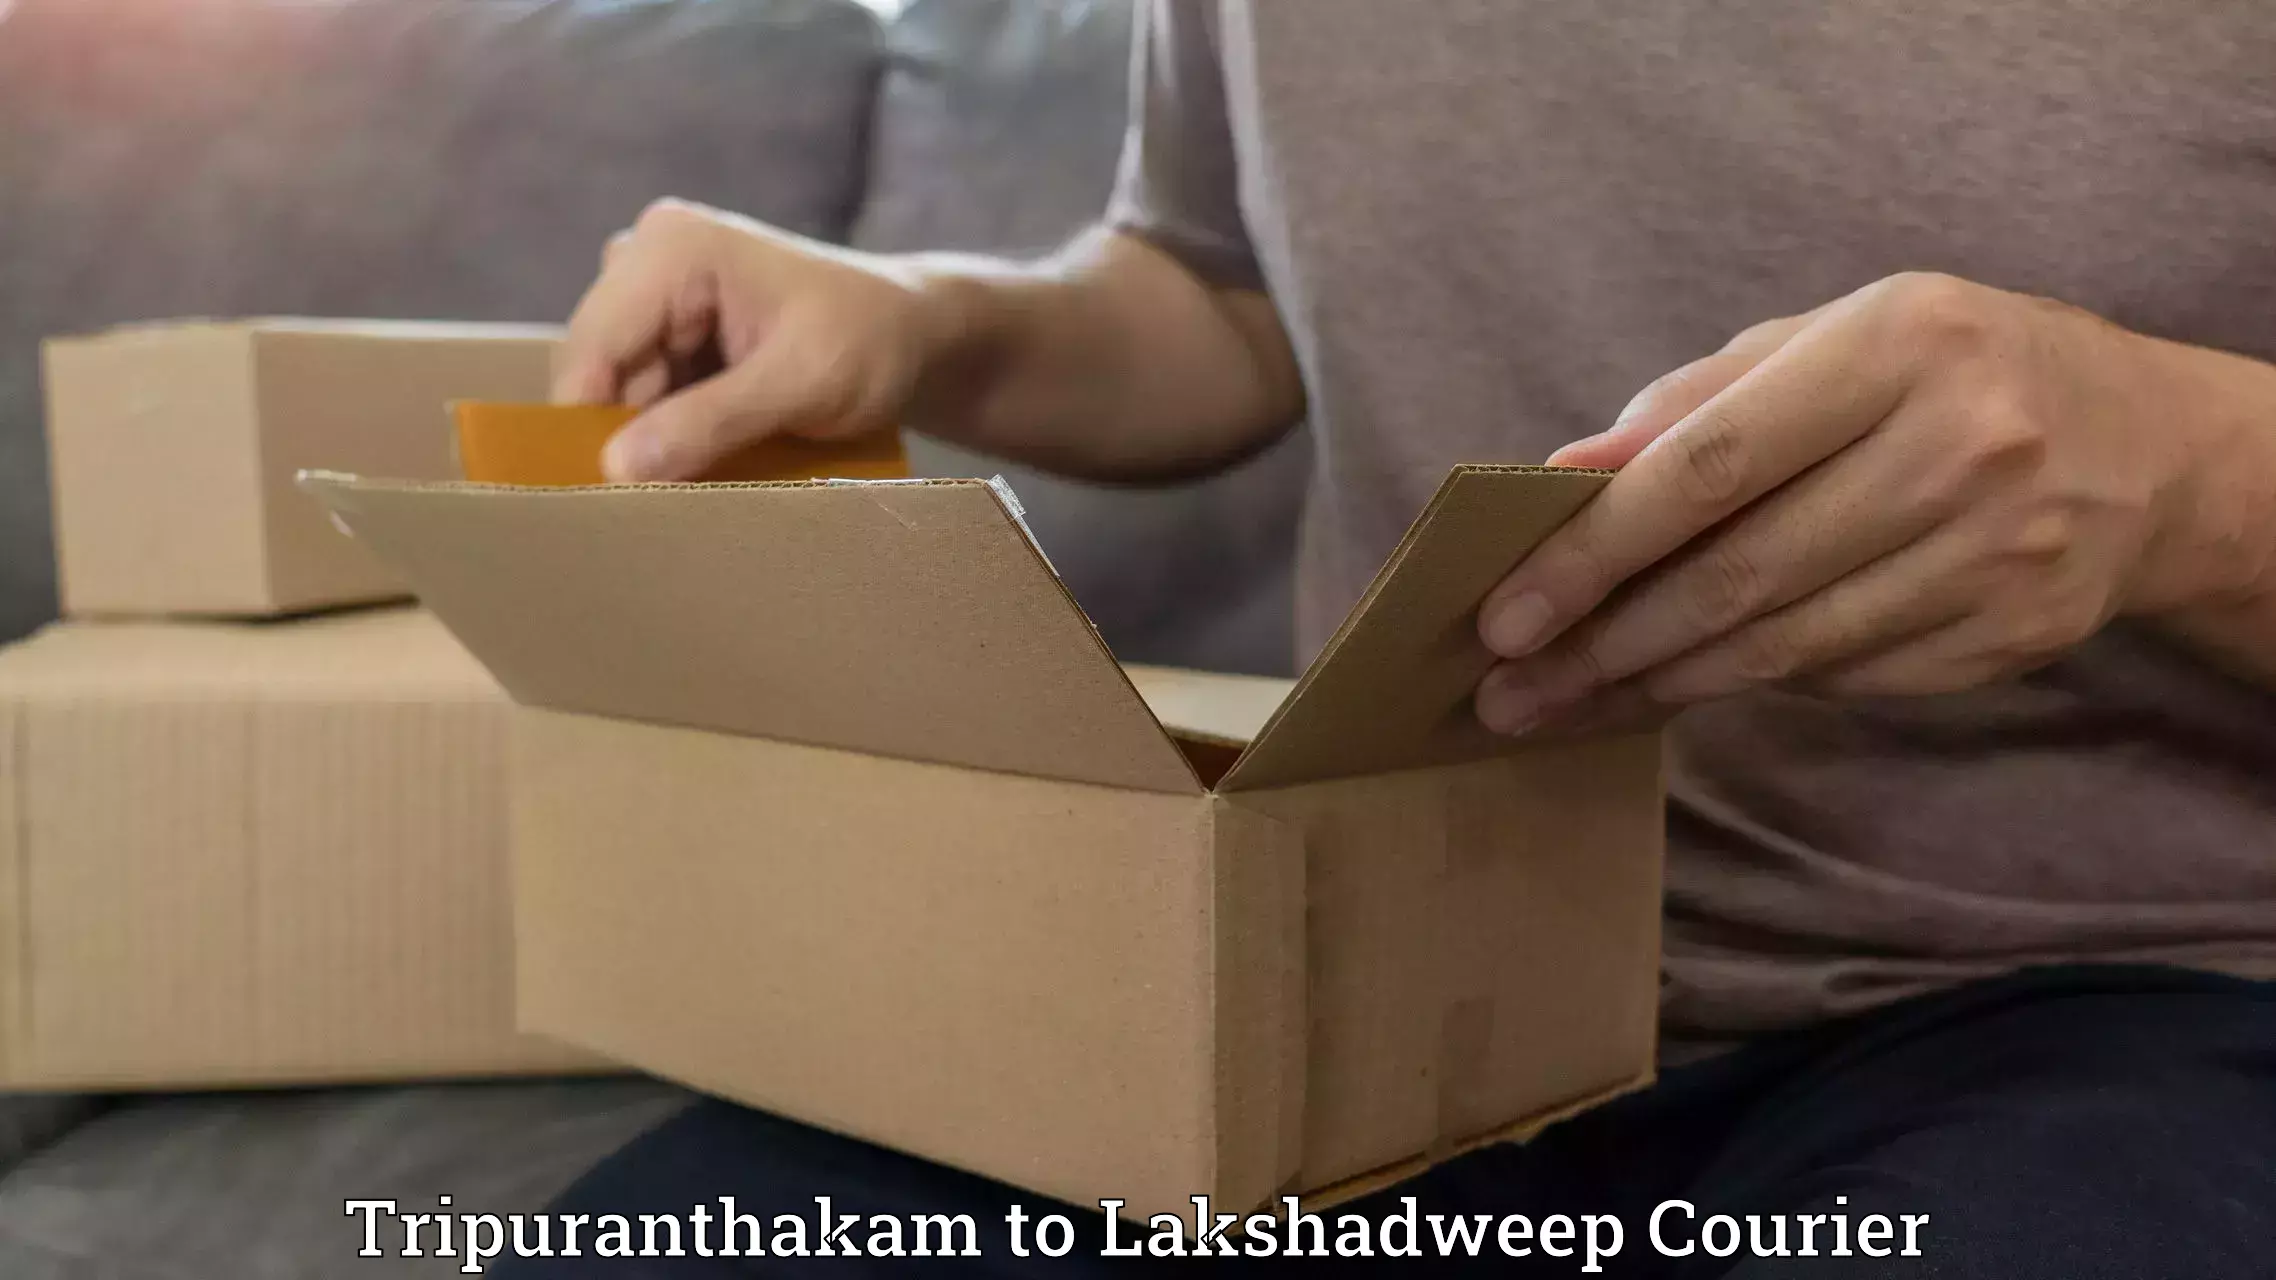 24-hour courier service in Tripuranthakam to Lakshadweep